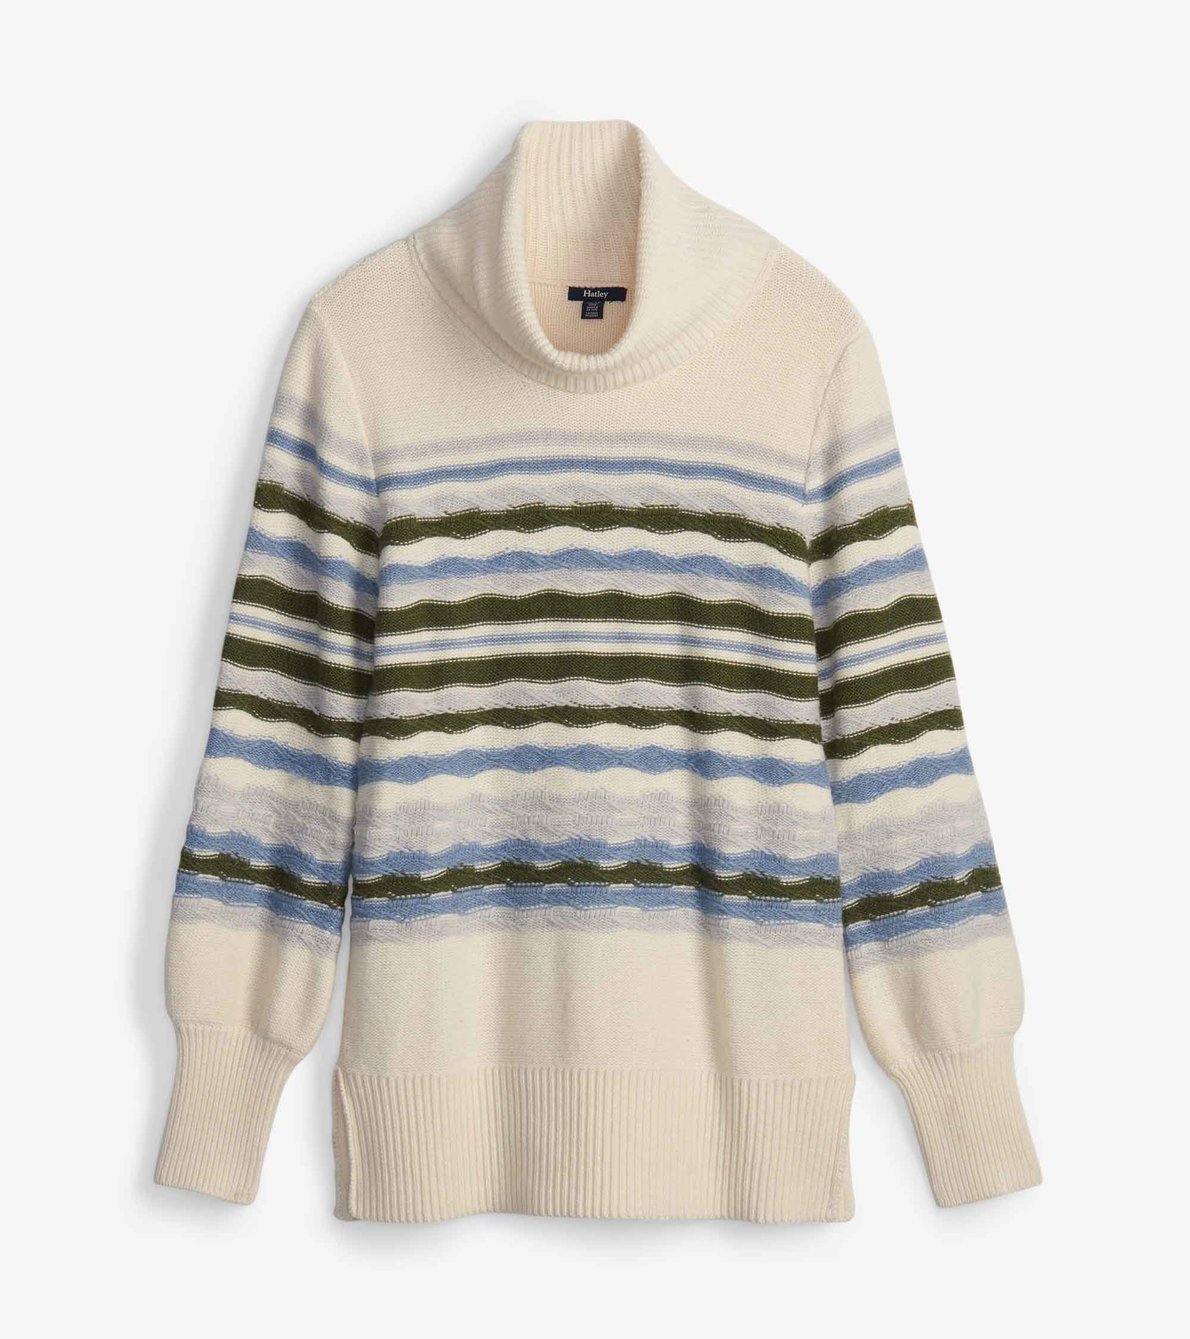 View larger image of Charlotte Jumper - Textured Stripes